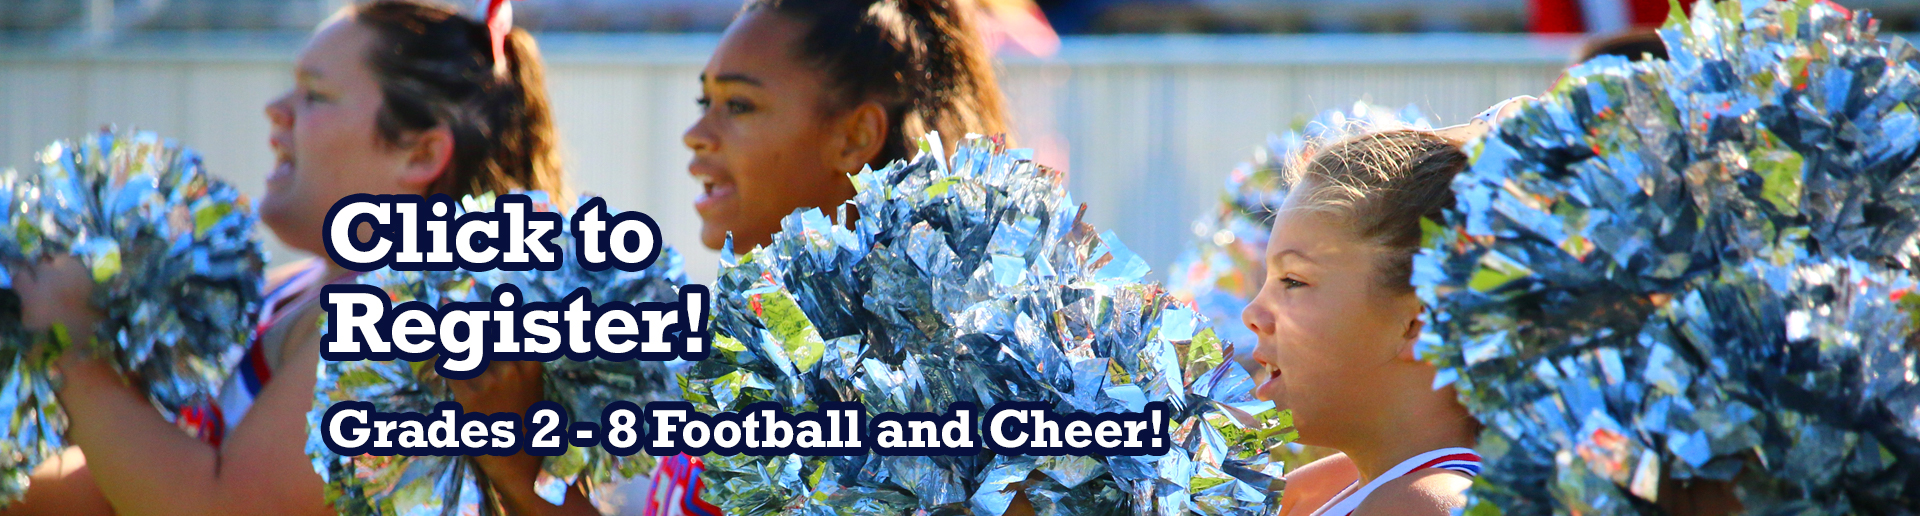 Cheer At Games and Competitions!